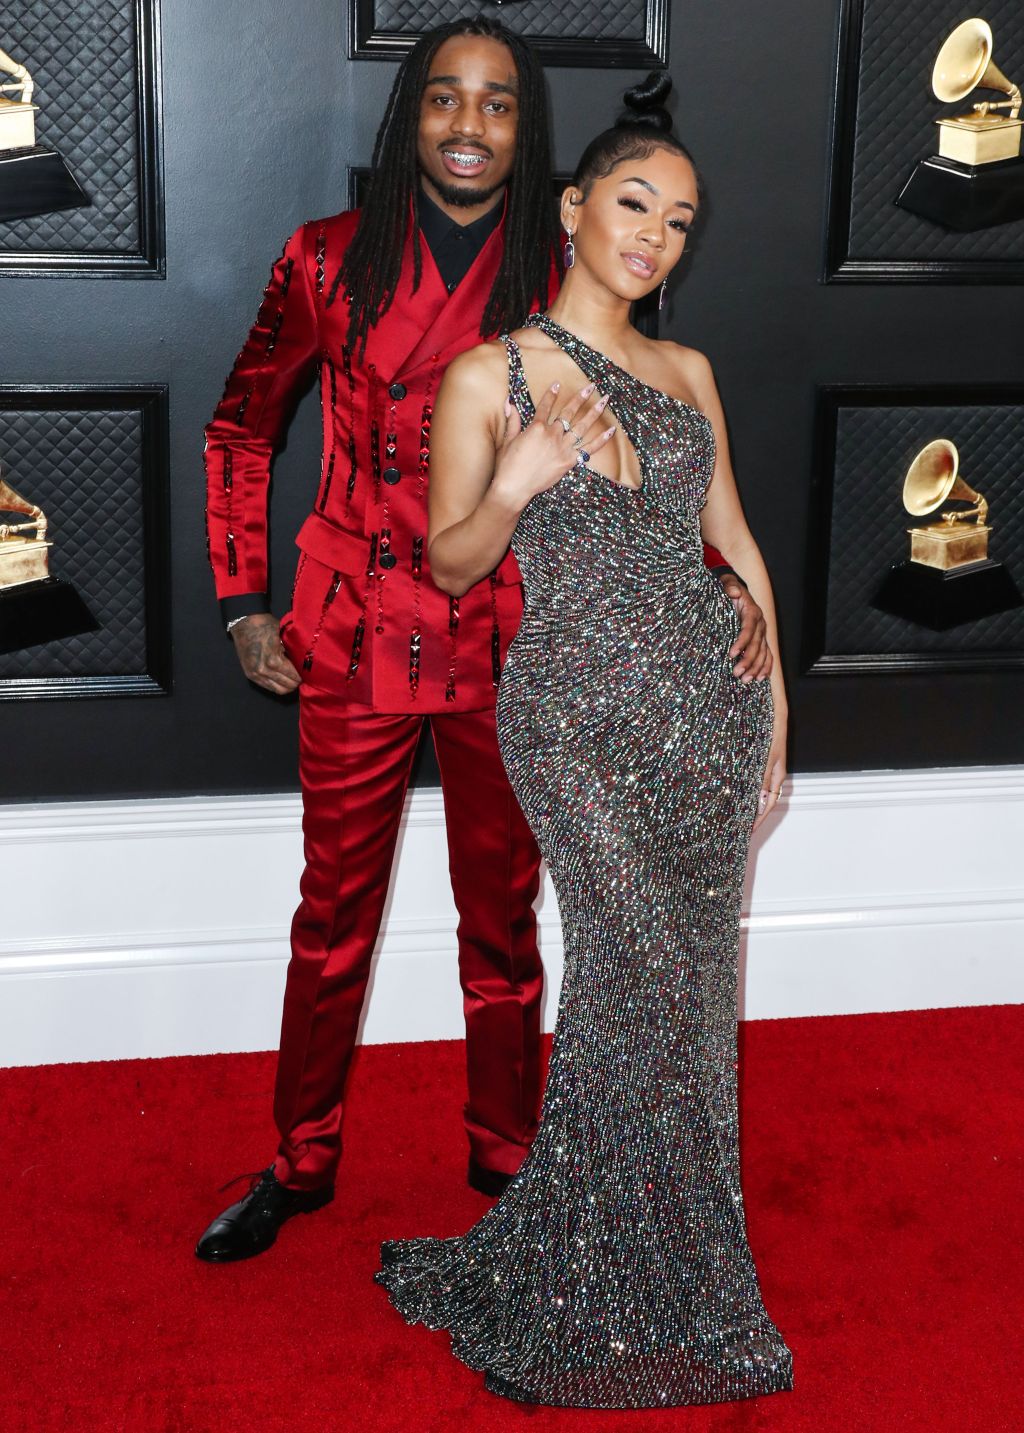 Quavo and girlfriend Saweetie arrive at the 62nd Annual GRAMMY Awards held at Staples Center on January 26, 2020 in Los Angeles, California, United States.